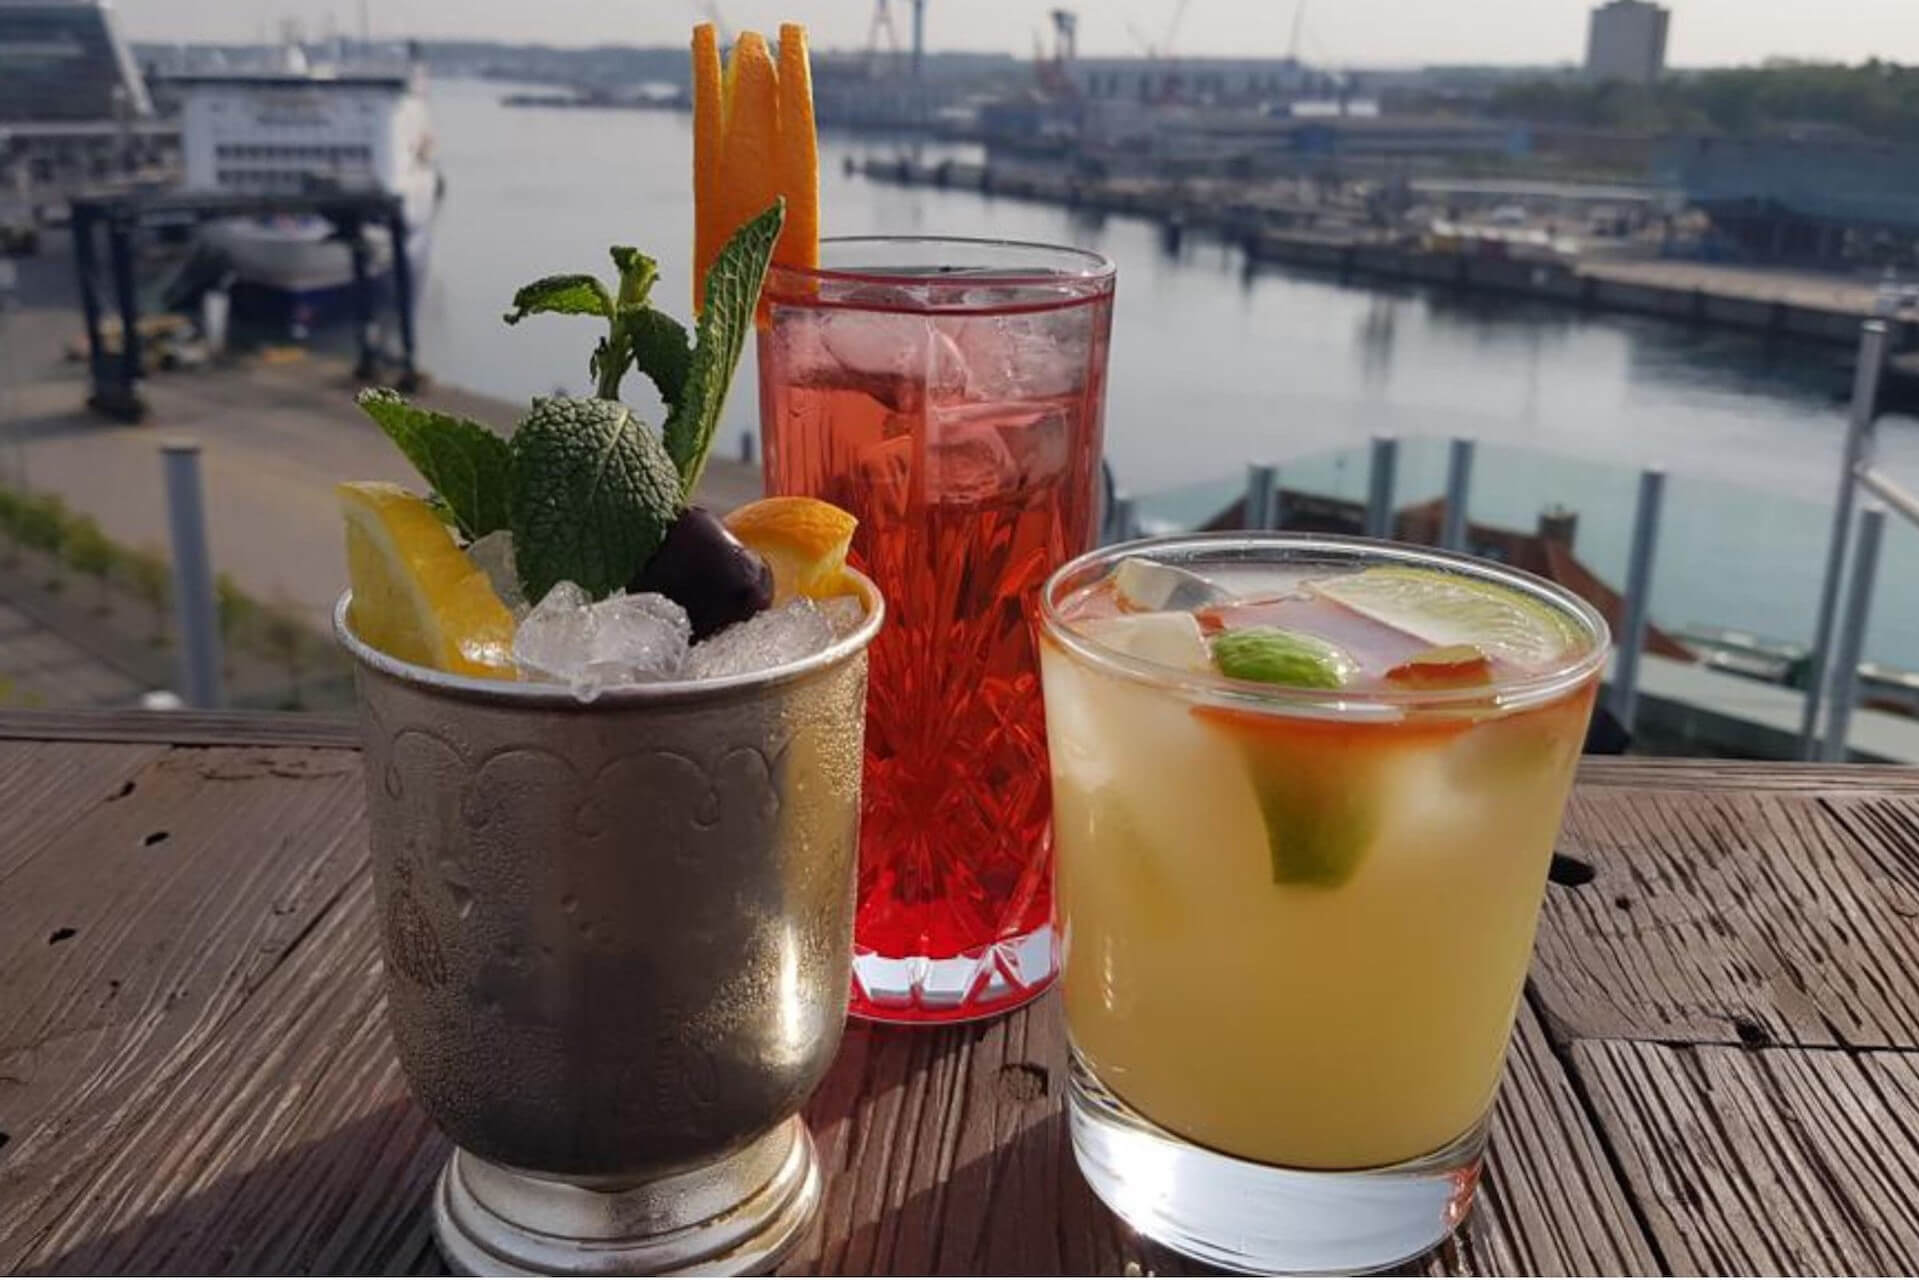 Enjoy three cocktails with a view in the Rooftopbar DECK 8 in the ATLANTIC Hotel Kiel